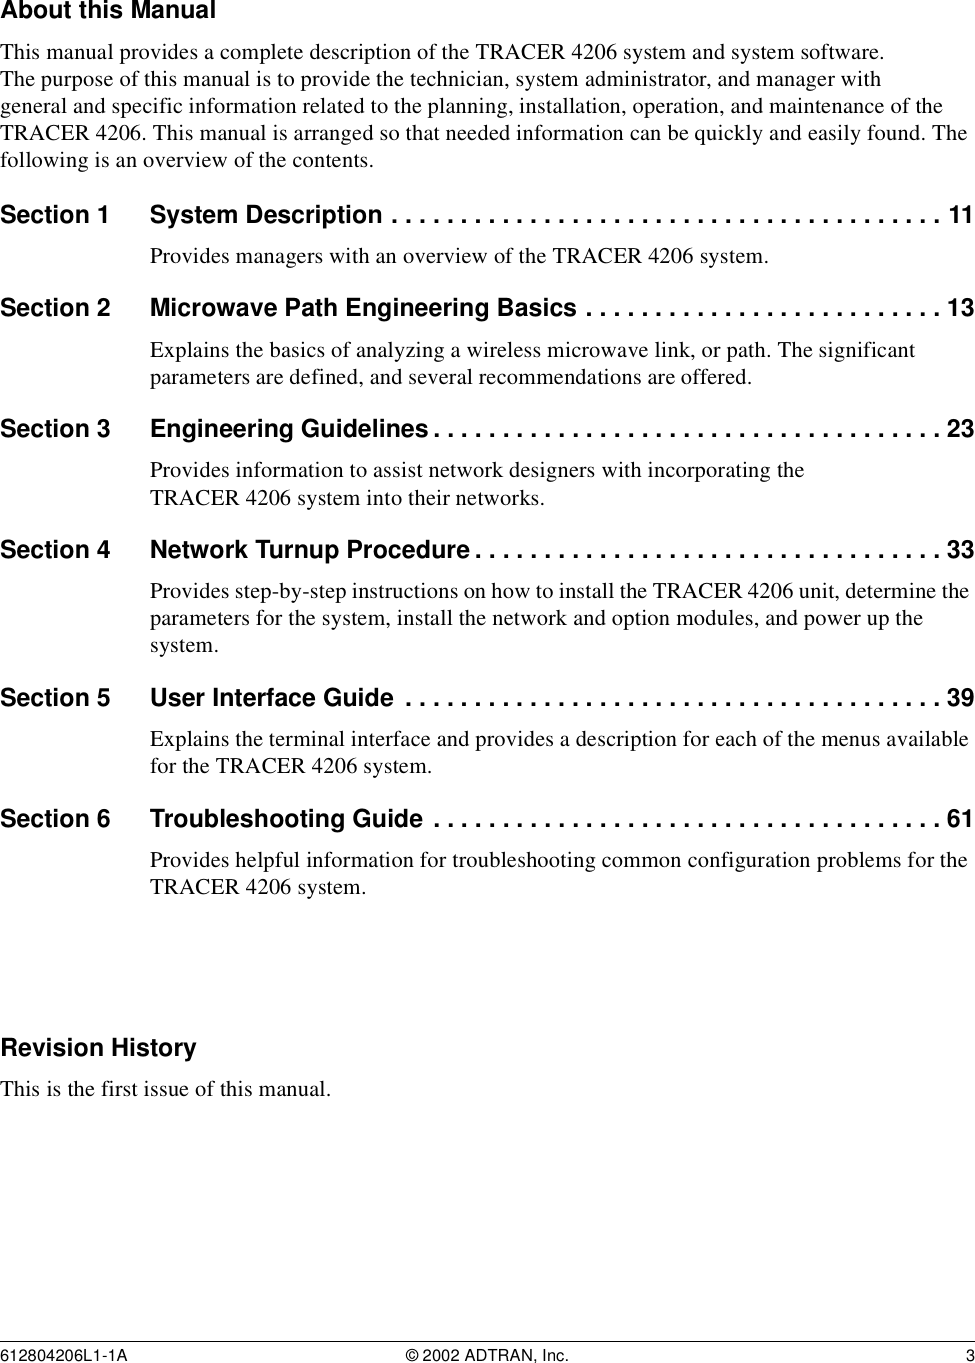 612804206L1-1A © 2002 ADTRAN, Inc. 3About this ManualThis manual provides a complete description of the TRACER 4206 system and system software. The purpose of this manual is to provide the technician, system administrator, and manager with general and specific information related to the planning, installation, operation, and maintenance of the TRACER 4206. This manual is arranged so that needed information can be quickly and easily found. The following is an overview of the contents.Section 1 System Description . . . . . . . . . . . . . . . . . . . . . . . . . . . . . . . . . . . . . . . . 11Provides managers with an overview of the TRACER 4206 system.Section 2 Microwave Path Engineering Basics . . . . . . . . . . . . . . . . . . . . . . . . . . 13Explains the basics of analyzing a wireless microwave link, or path. The significant parameters are defined, and several recommendations are offered.Section 3 Engineering Guidelines . . . . . . . . . . . . . . . . . . . . . . . . . . . . . . . . . . . . . 23Provides information to assist network designers with incorporating the TRACER 4206 system into their networks.Section 4 Network Turnup Procedure . . . . . . . . . . . . . . . . . . . . . . . . . . . . . . . . . . 33Provides step-by-step instructions on how to install the TRACER 4206 unit, determine the parameters for the system, install the network and option modules, and power up the system.Section 5 User Interface Guide . . . . . . . . . . . . . . . . . . . . . . . . . . . . . . . . . . . . . . . 39Explains the terminal interface and provides a description for each of the menus available for the TRACER 4206 system.Section 6 Troubleshooting Guide . . . . . . . . . . . . . . . . . . . . . . . . . . . . . . . . . . . . . 61Provides helpful information for troubleshooting common configuration problems for the TRACER 4206 system.Revision HistoryThis is the first issue of this manual.